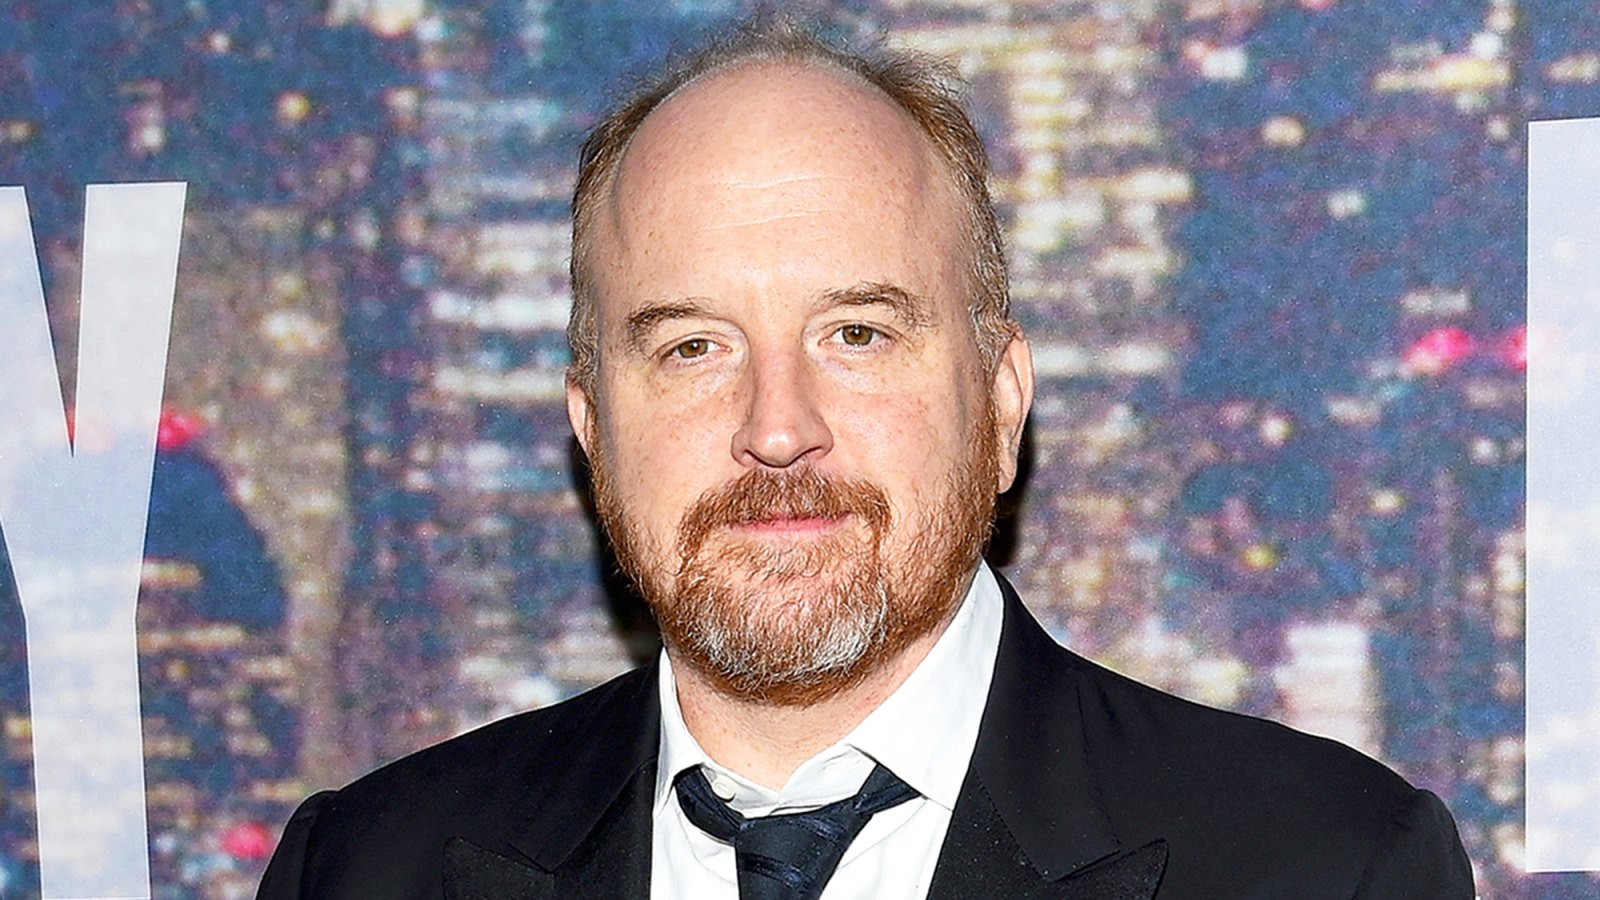 Louis C.K. attends SNL 40th Anniversary Celebration at Rockefeller Plaza in New York City.